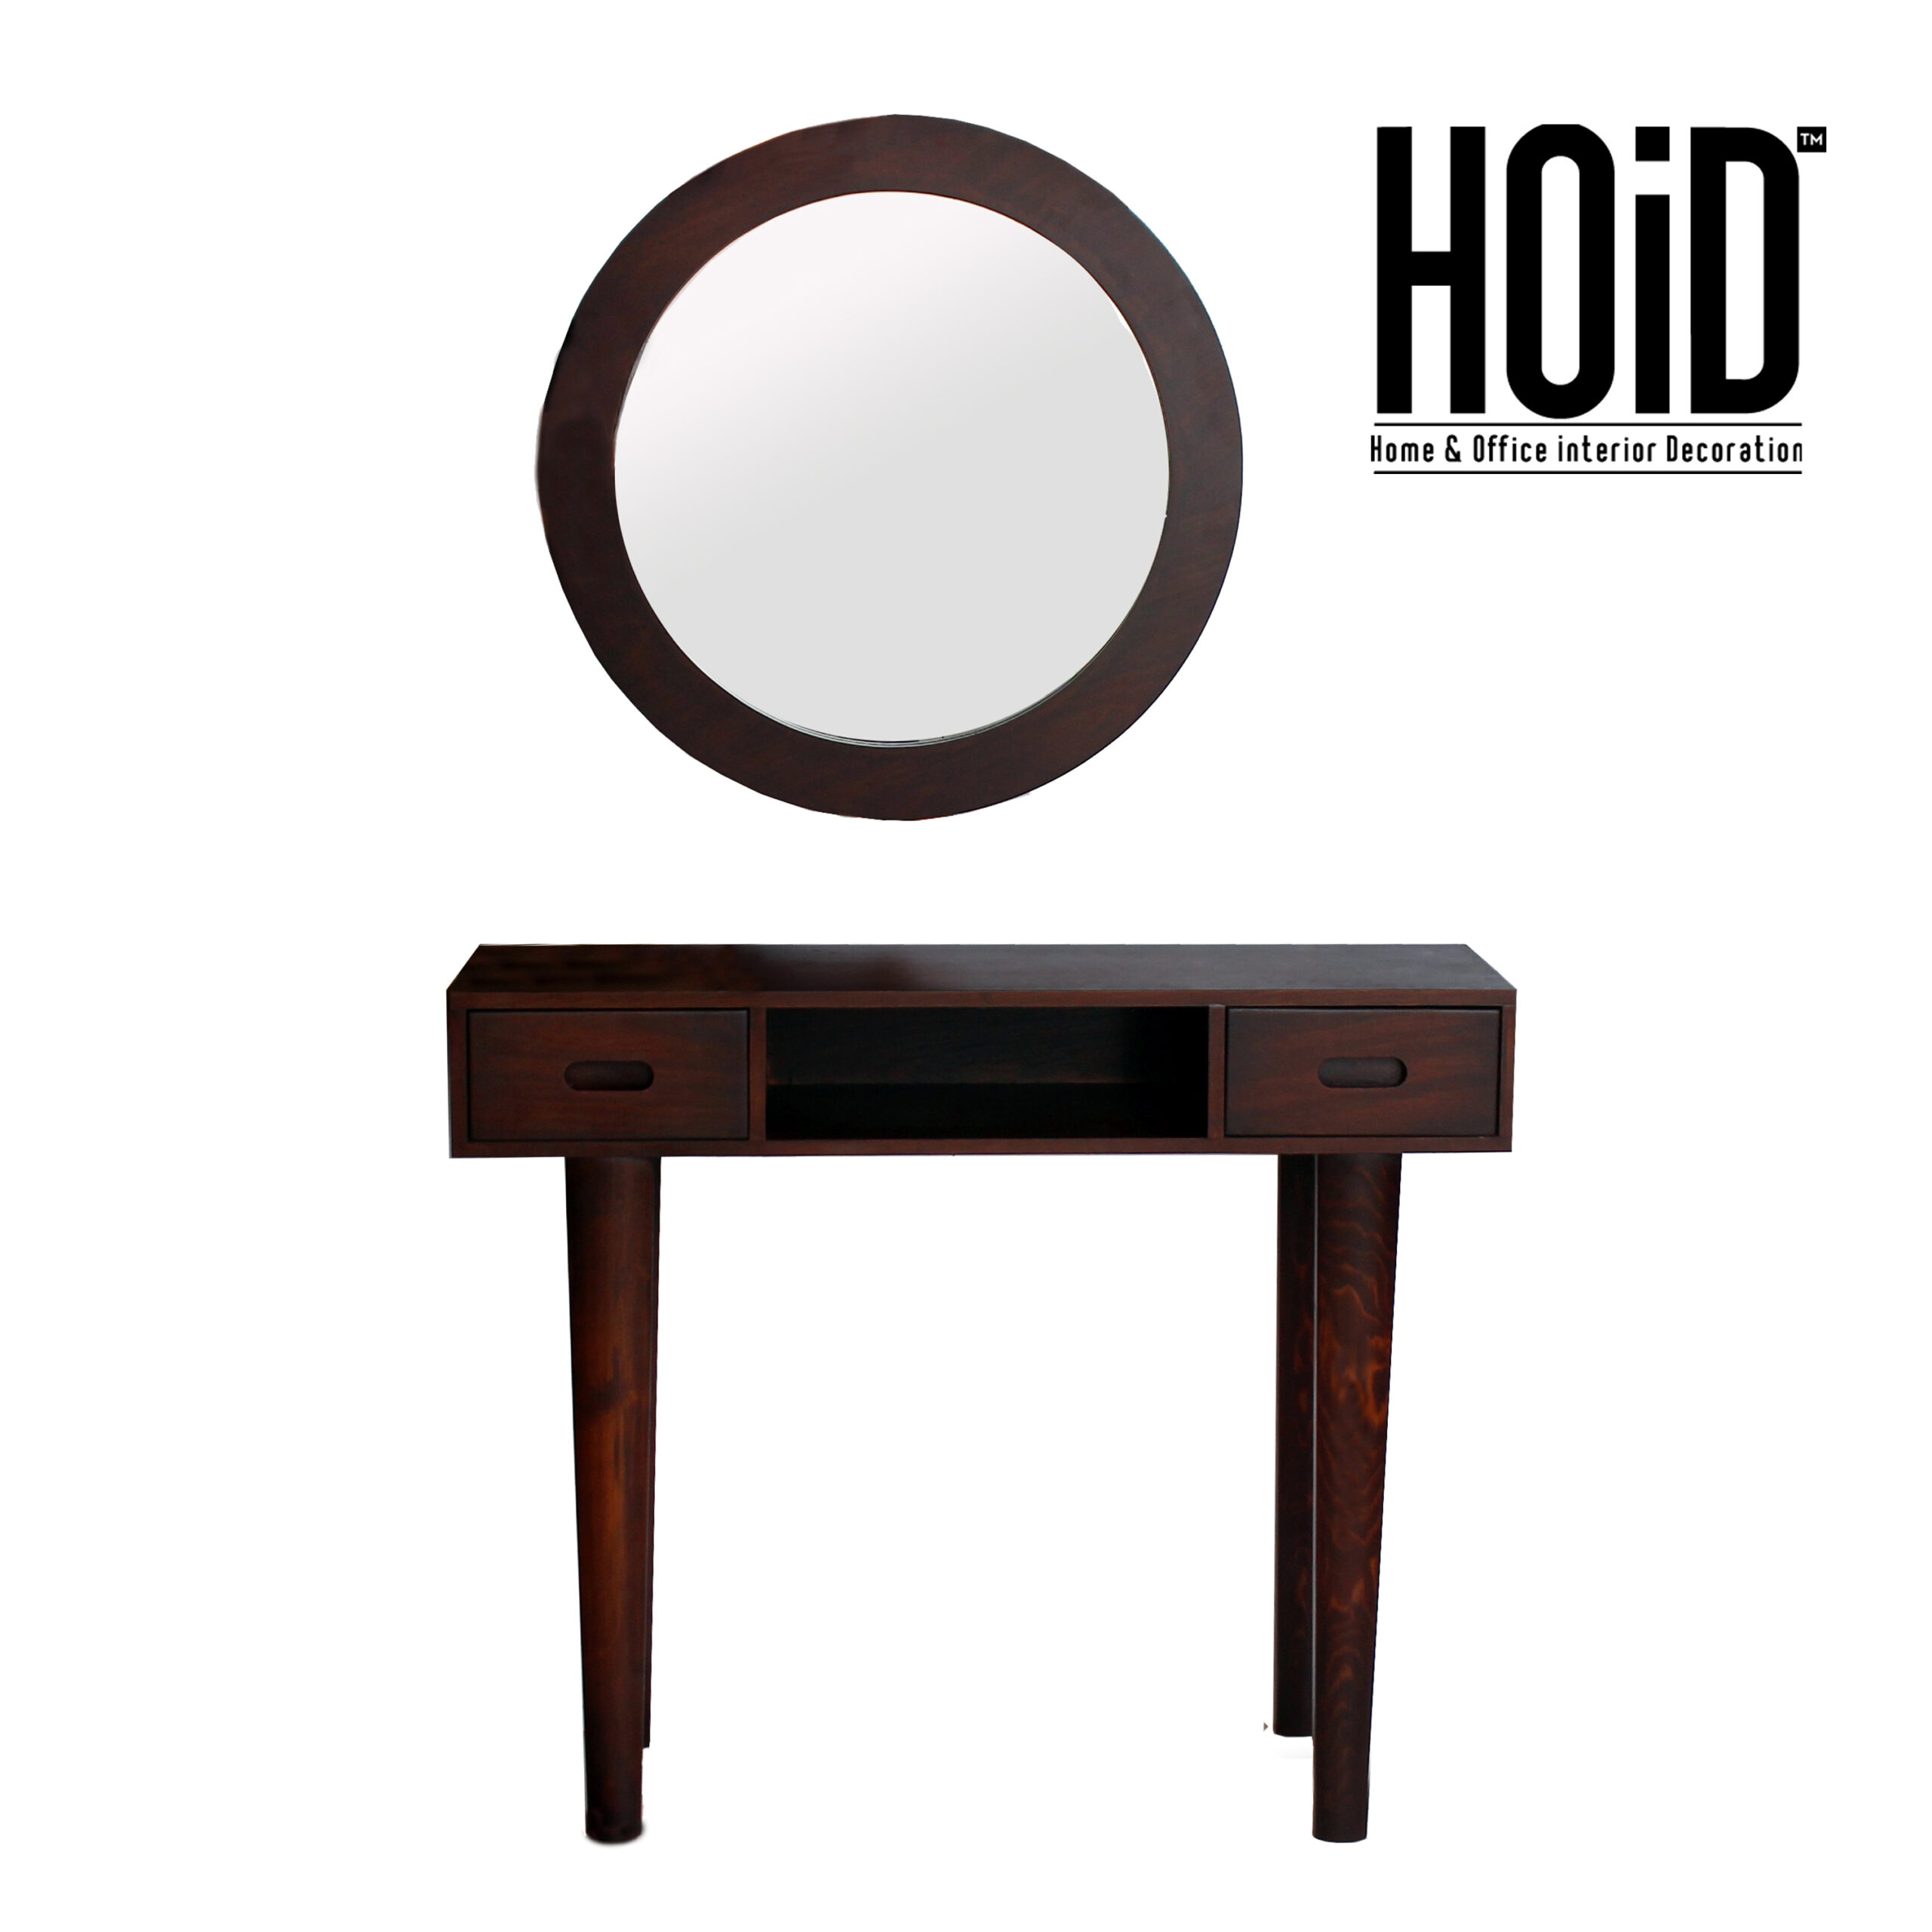 chic-console-with-mirror-scaled-2.jpg